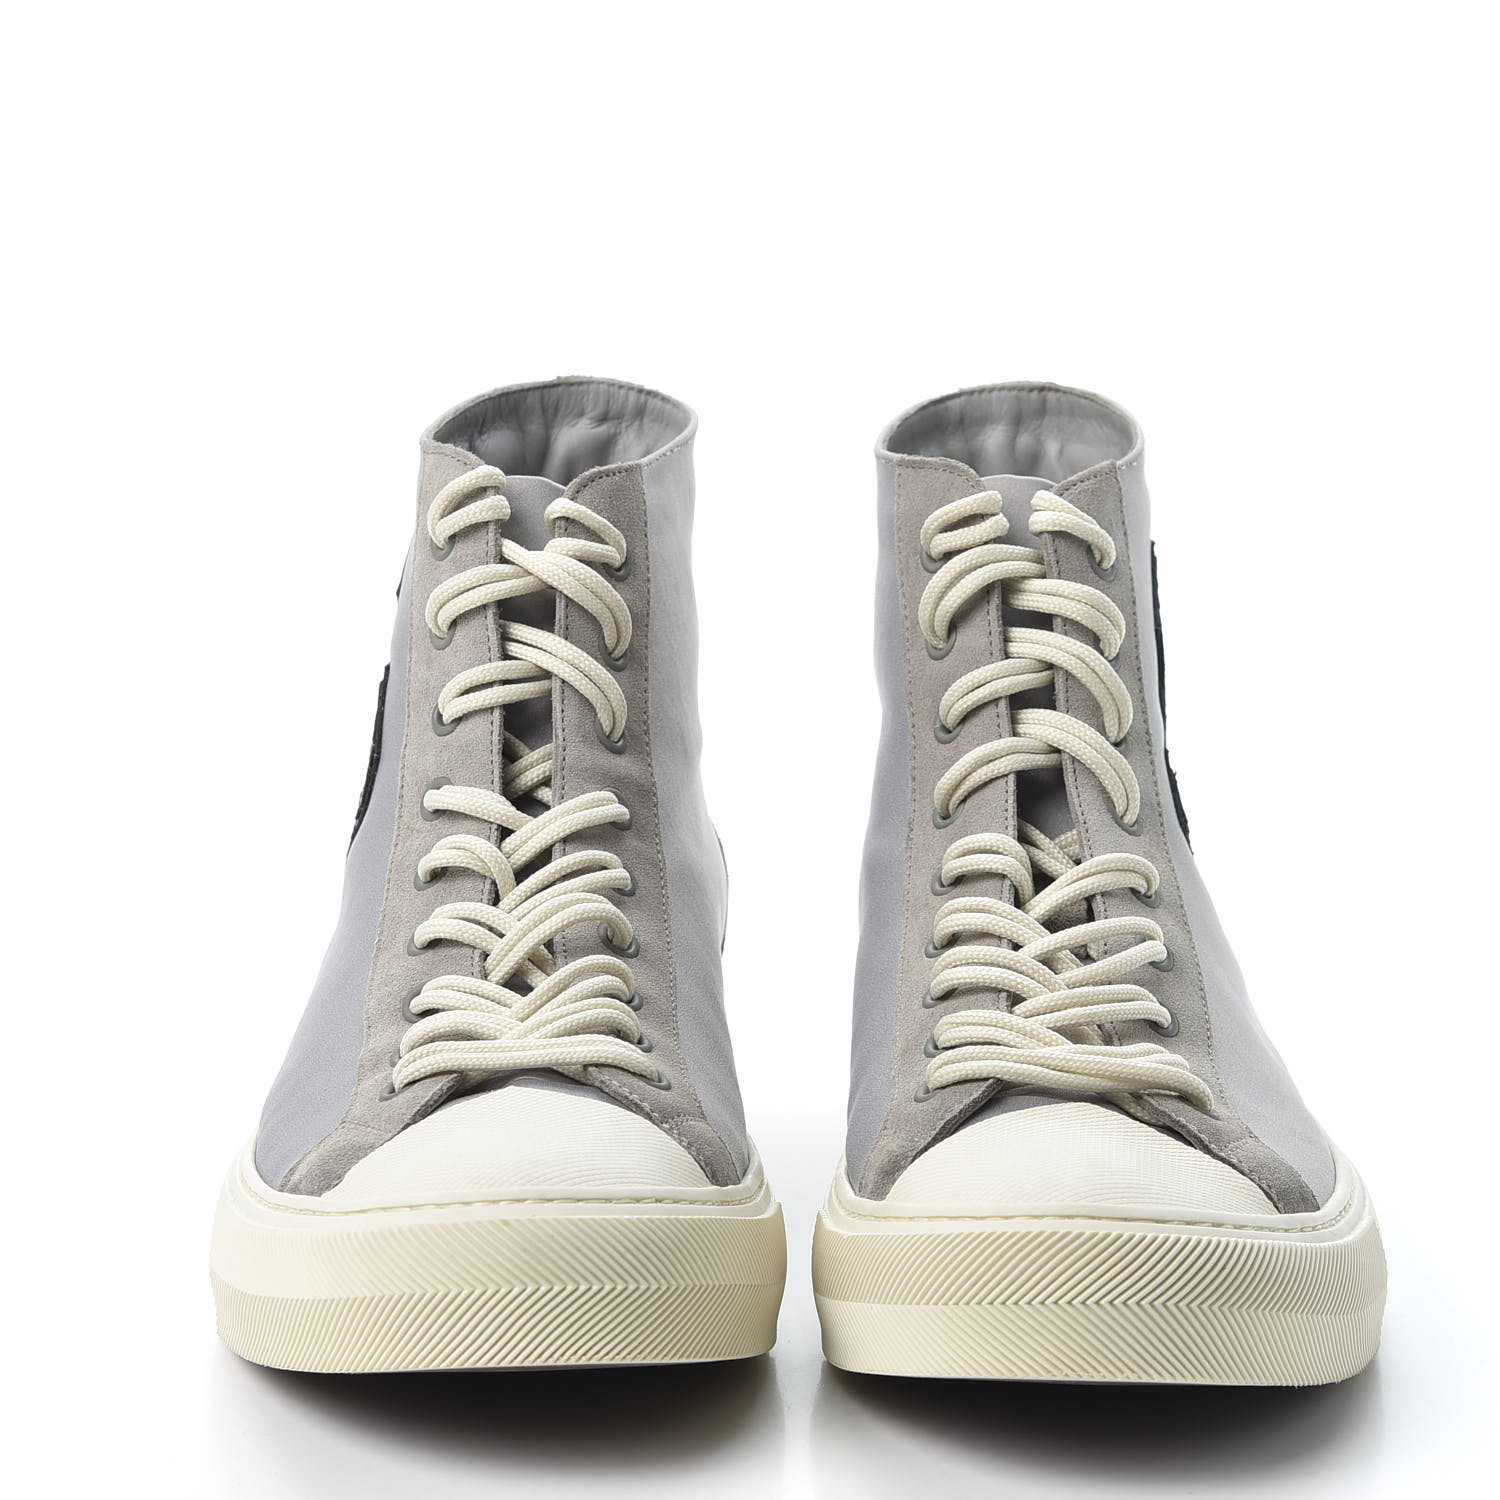 LOUIS VUITTON Suede Sneakers 9 Gray 576125 | FASHIONPHILE